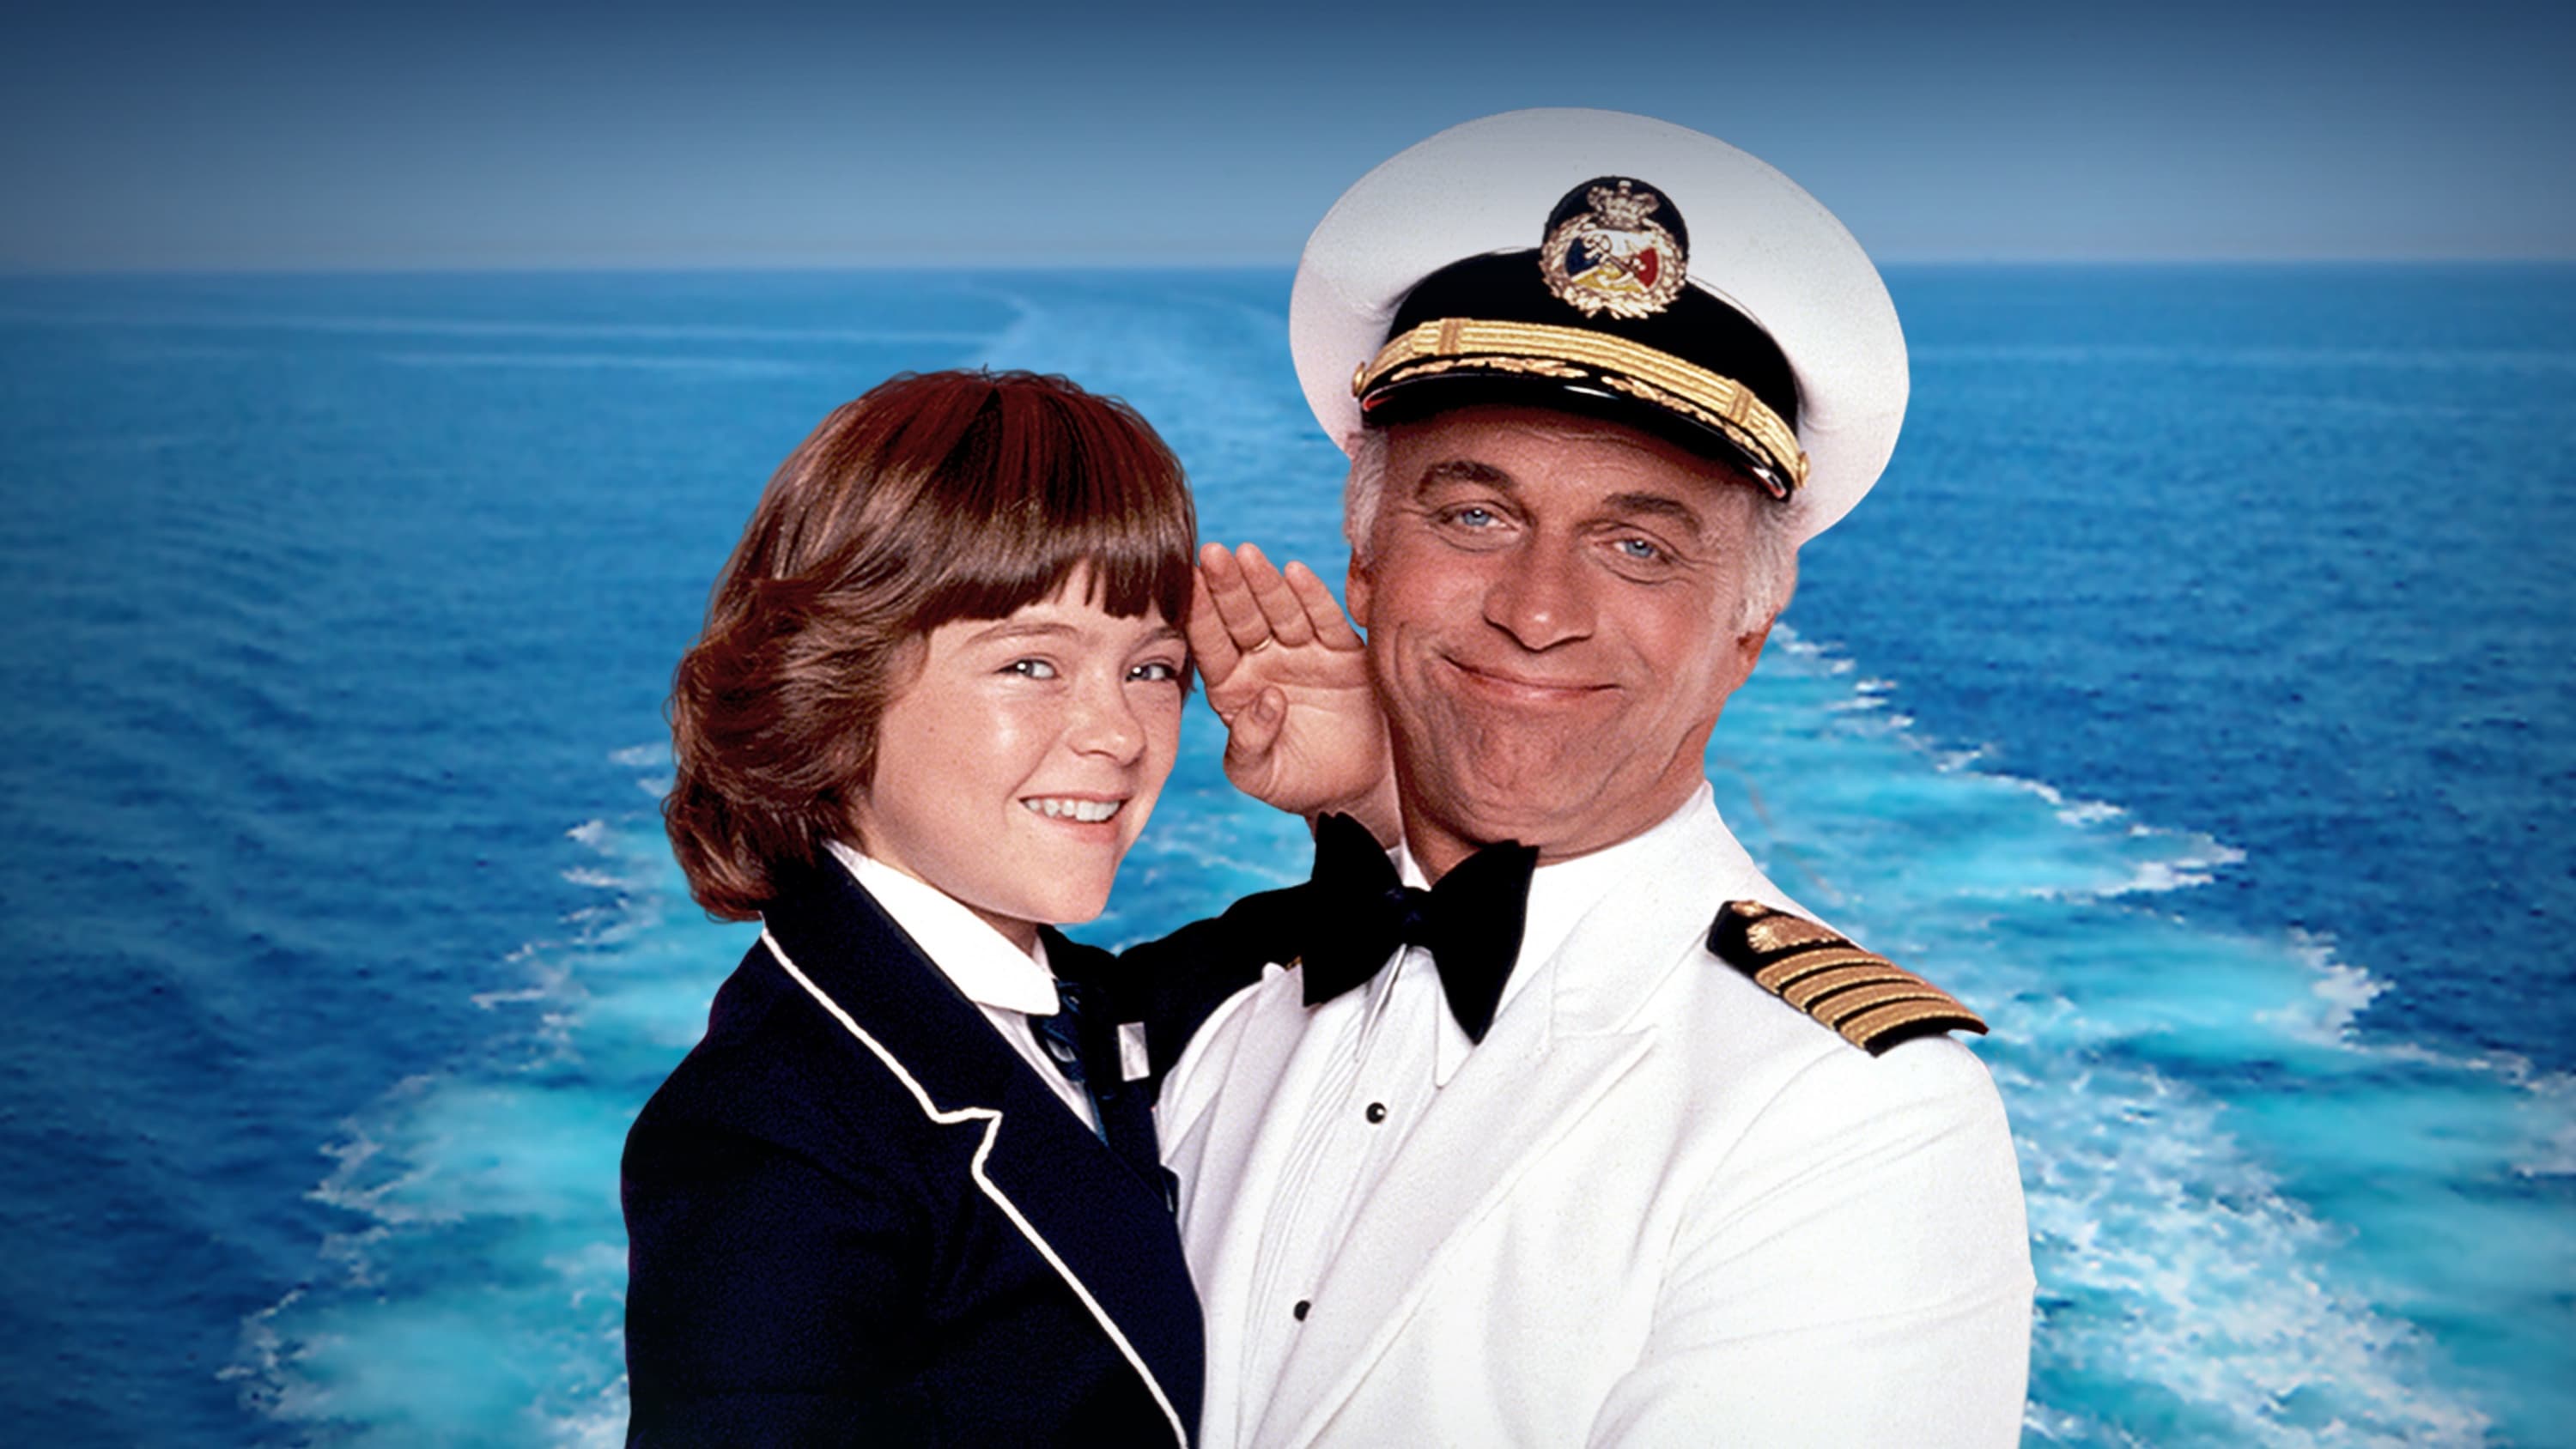 The Love Boat TV Show Seasons, Cast, Trailer, Episodes, Release Date